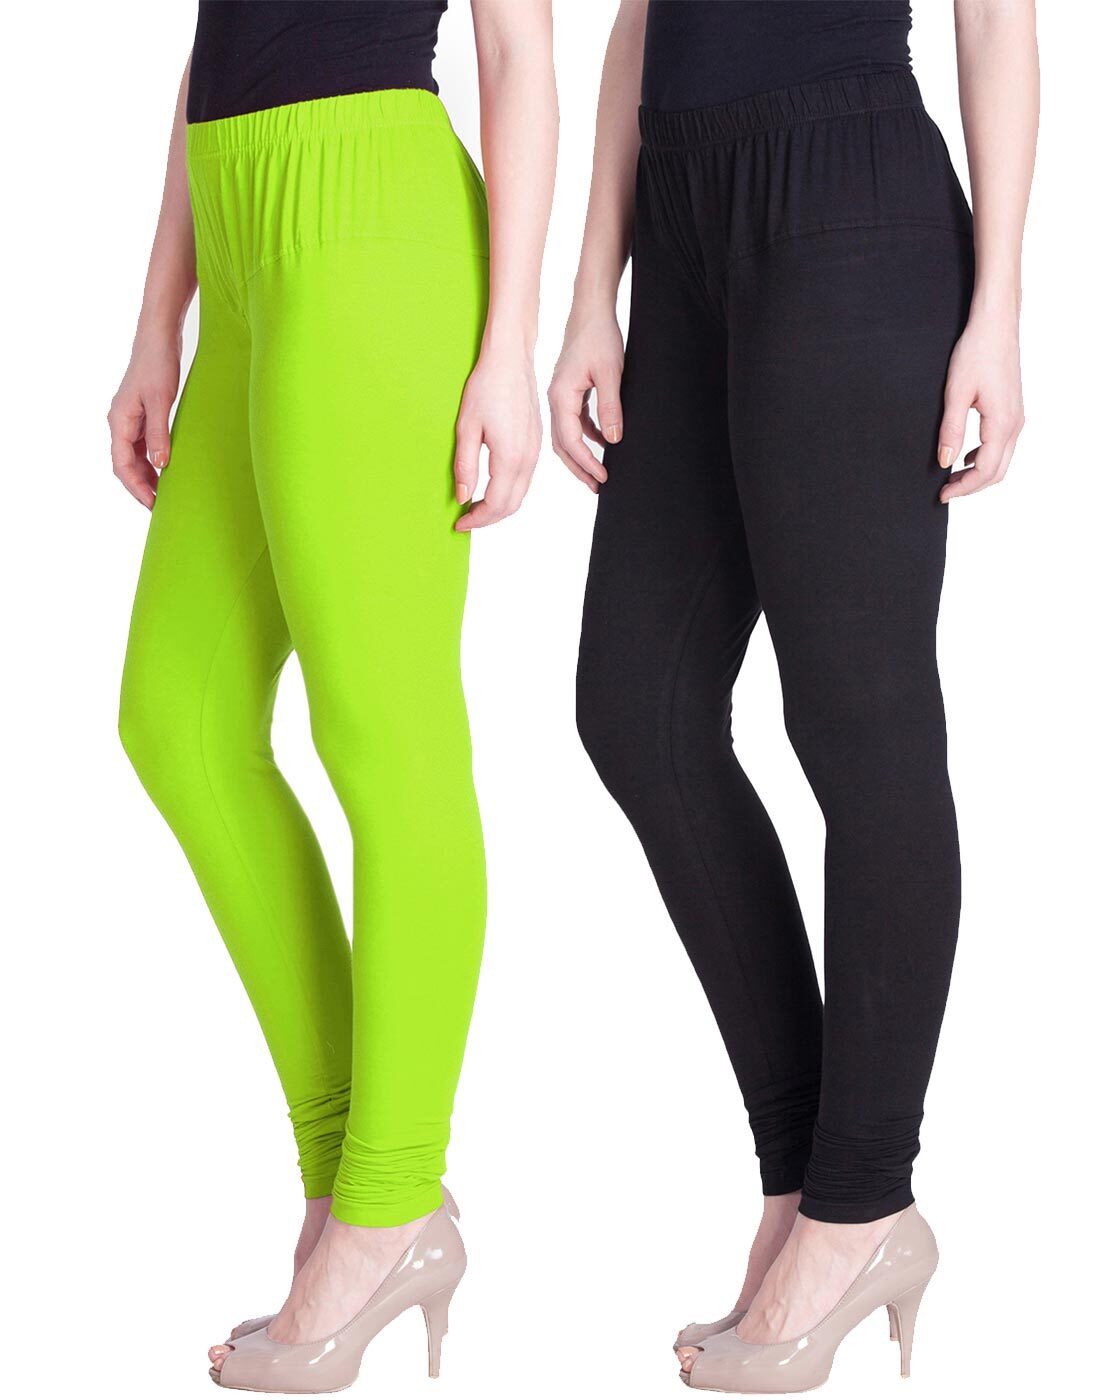 Up To 57% Off on Women's Comfy Cotton Leggings... | Groupon Goods